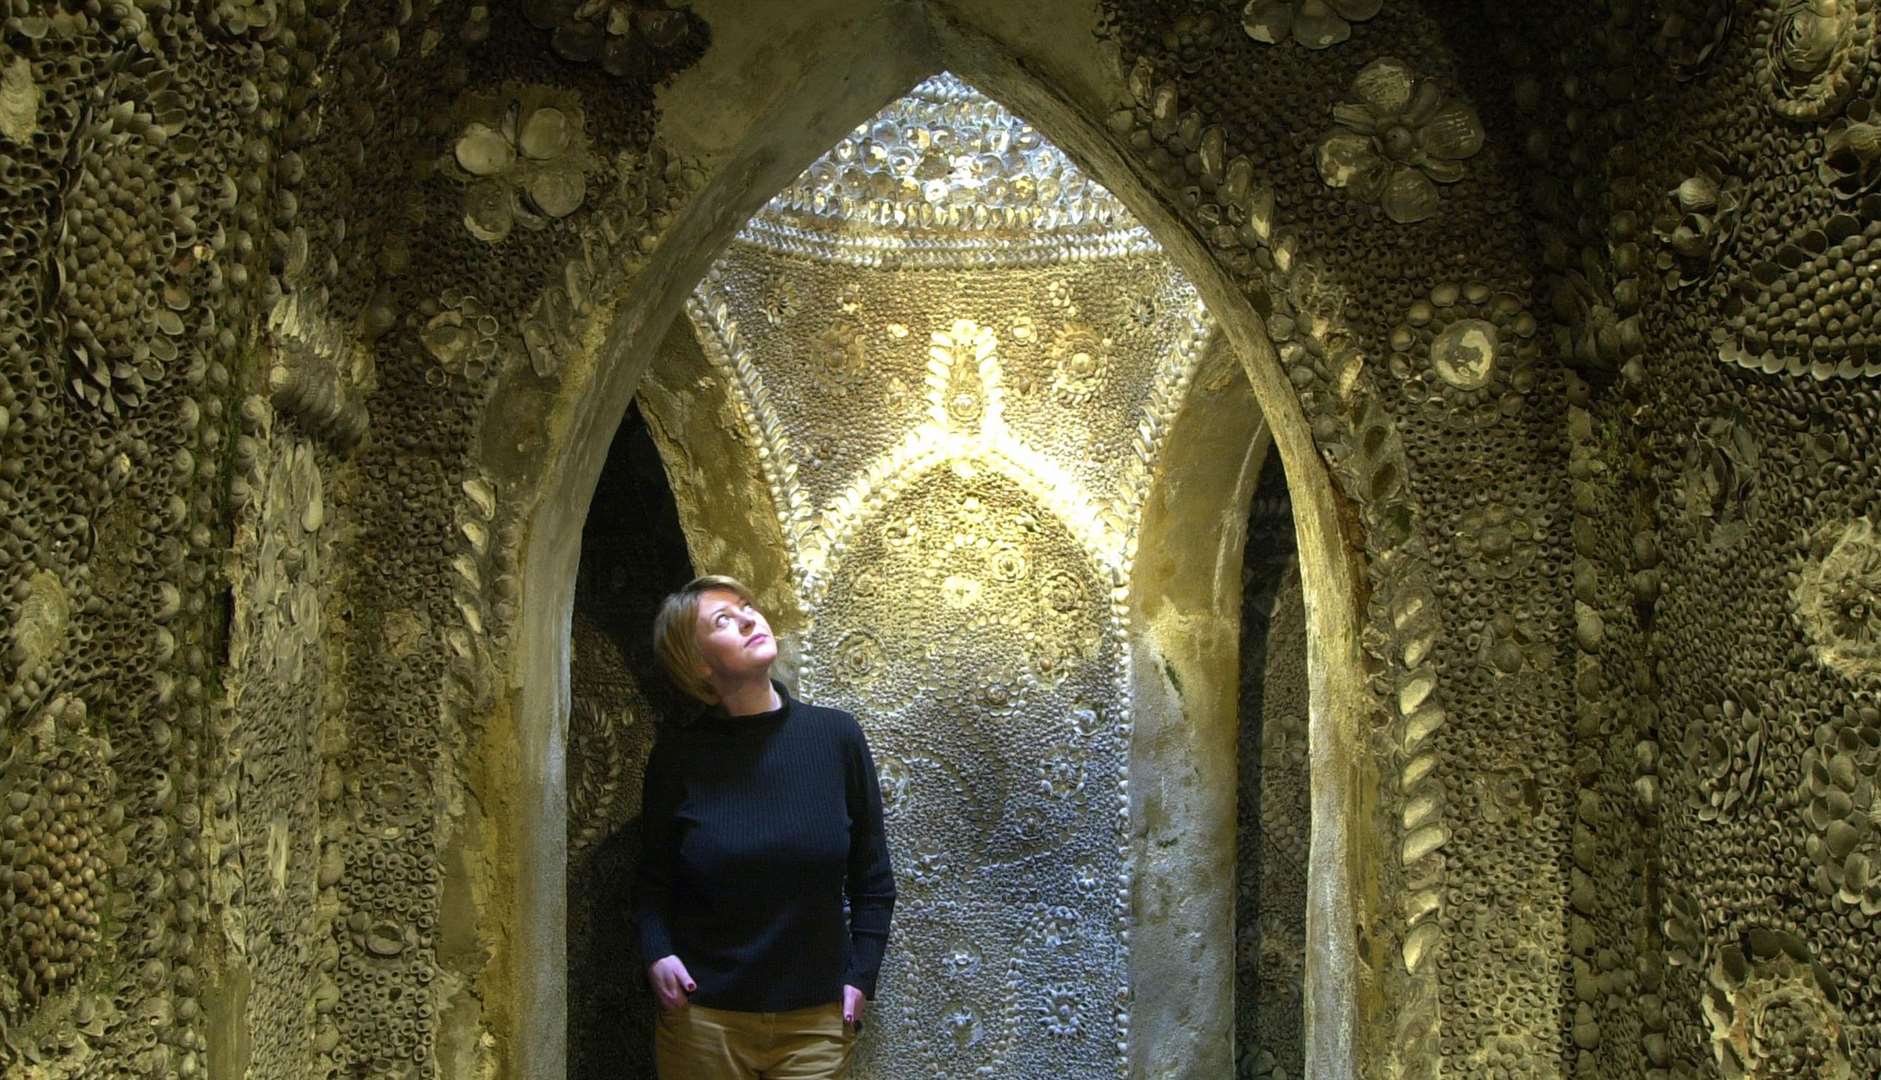 The Shell Grotto takes the fifth spot on the Top 10 list.